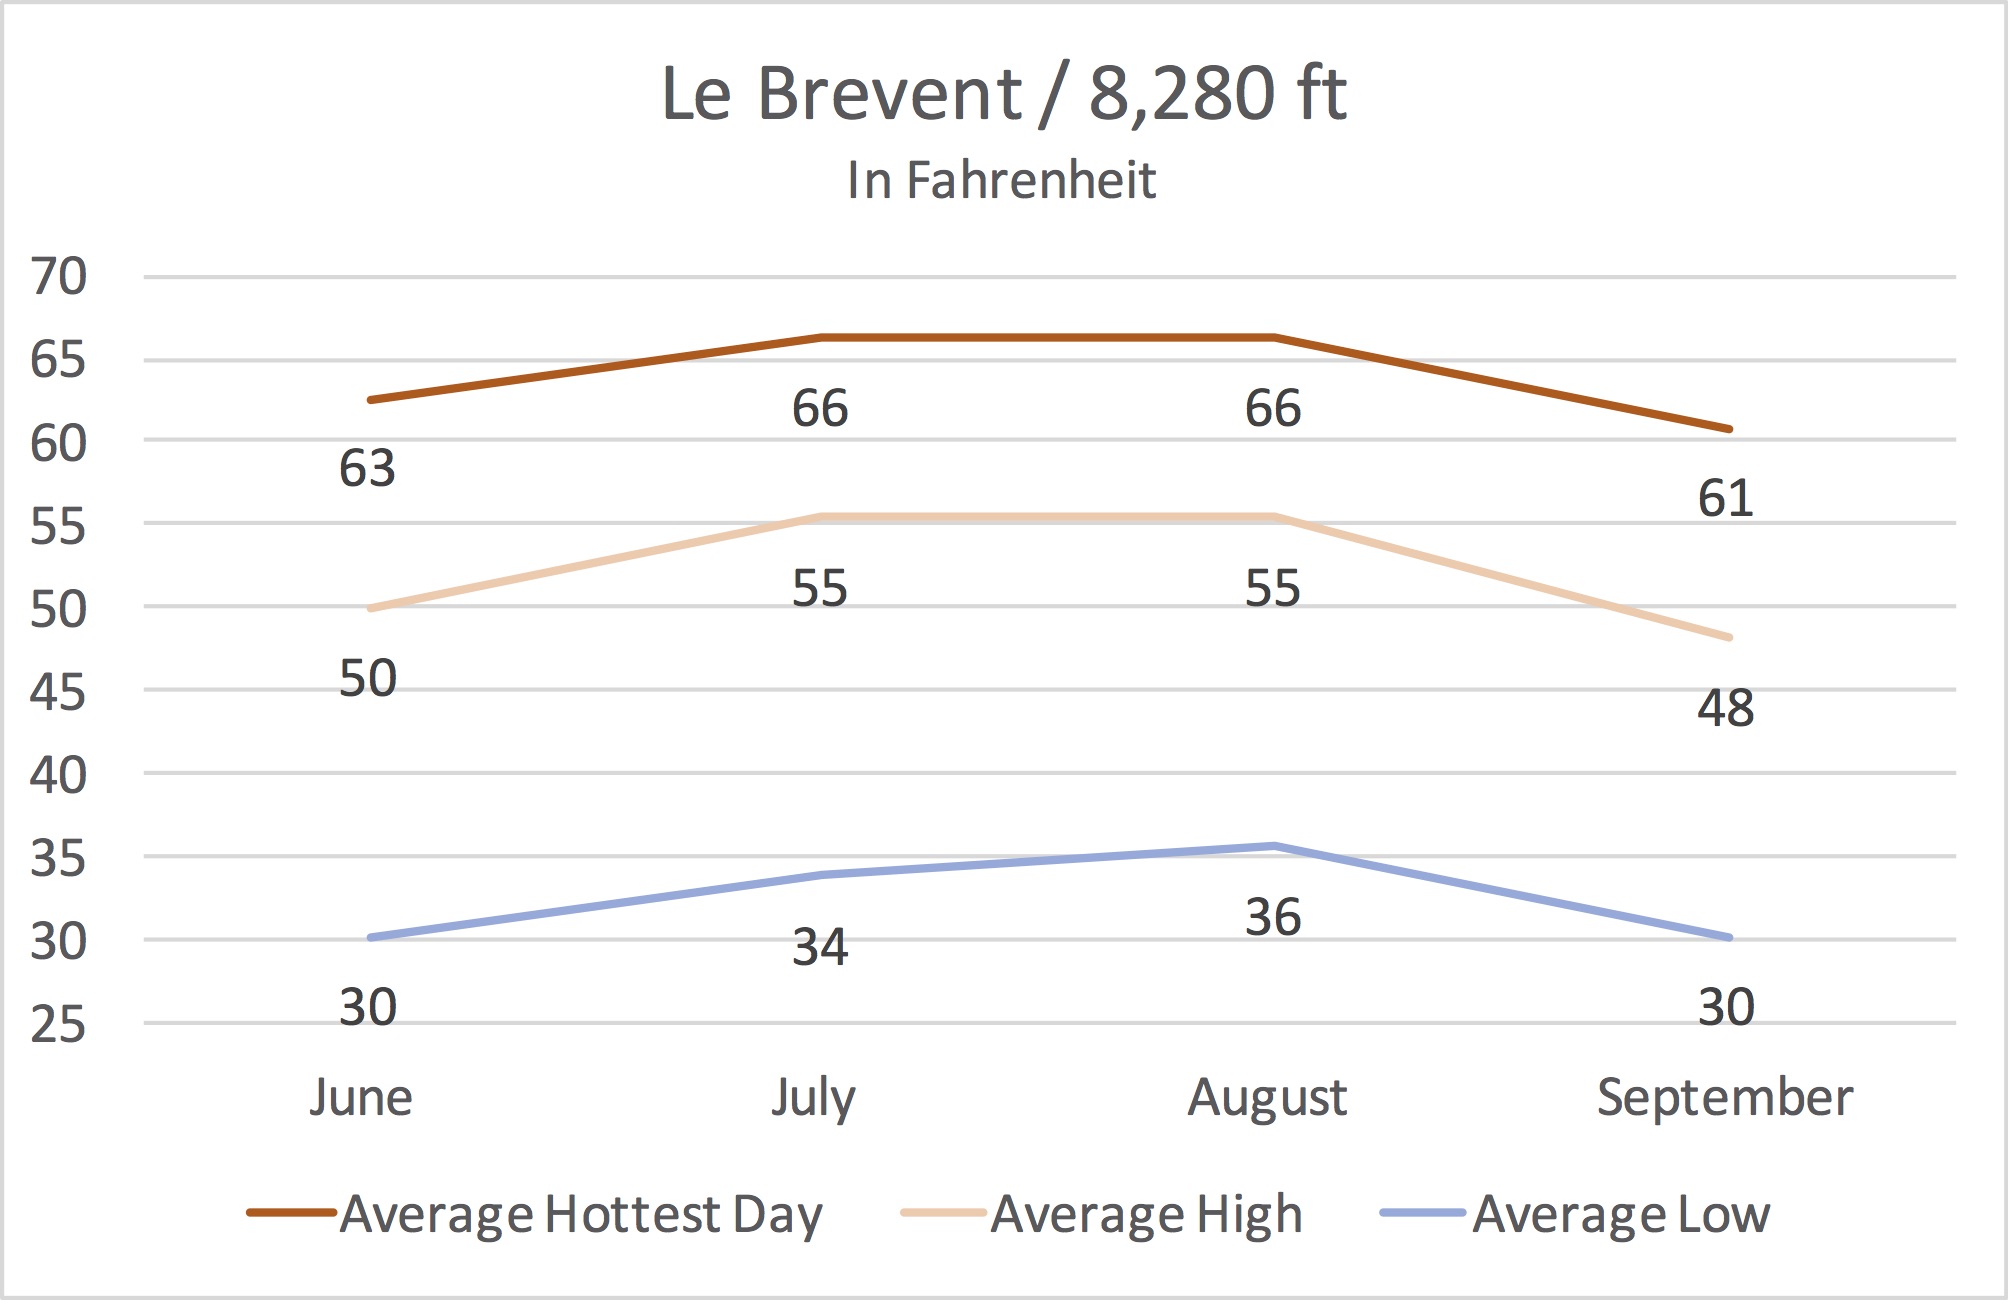 Le Brevent Average Temperature from June to September